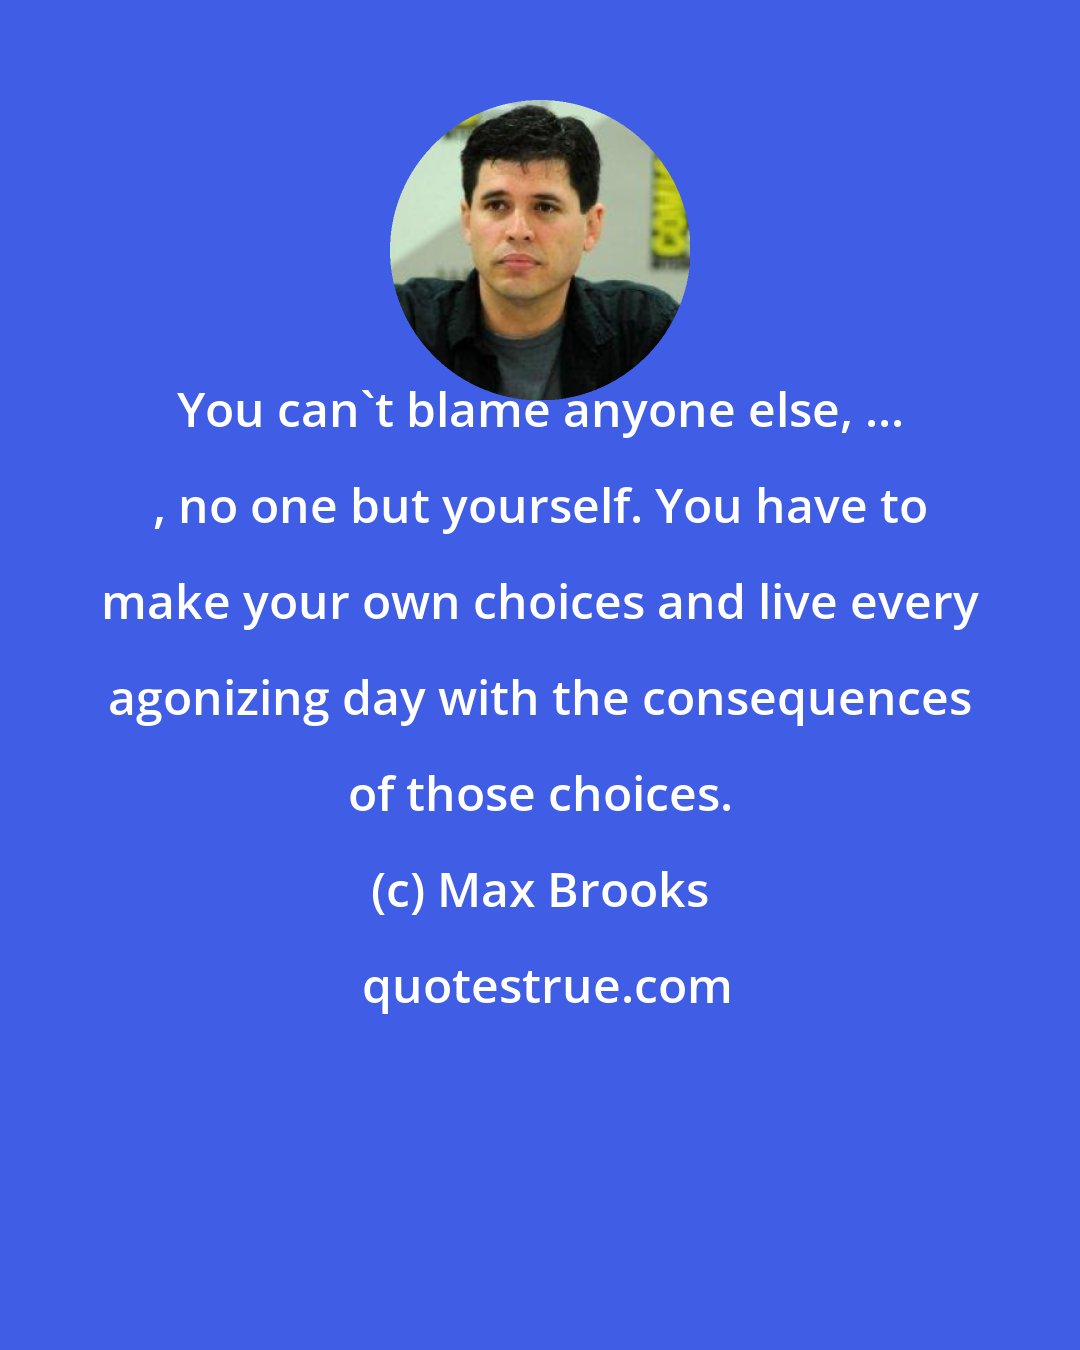 Max Brooks: You can't blame anyone else, ... , no one but yourself. You have to make your own choices and live every agonizing day with the consequences of those choices.